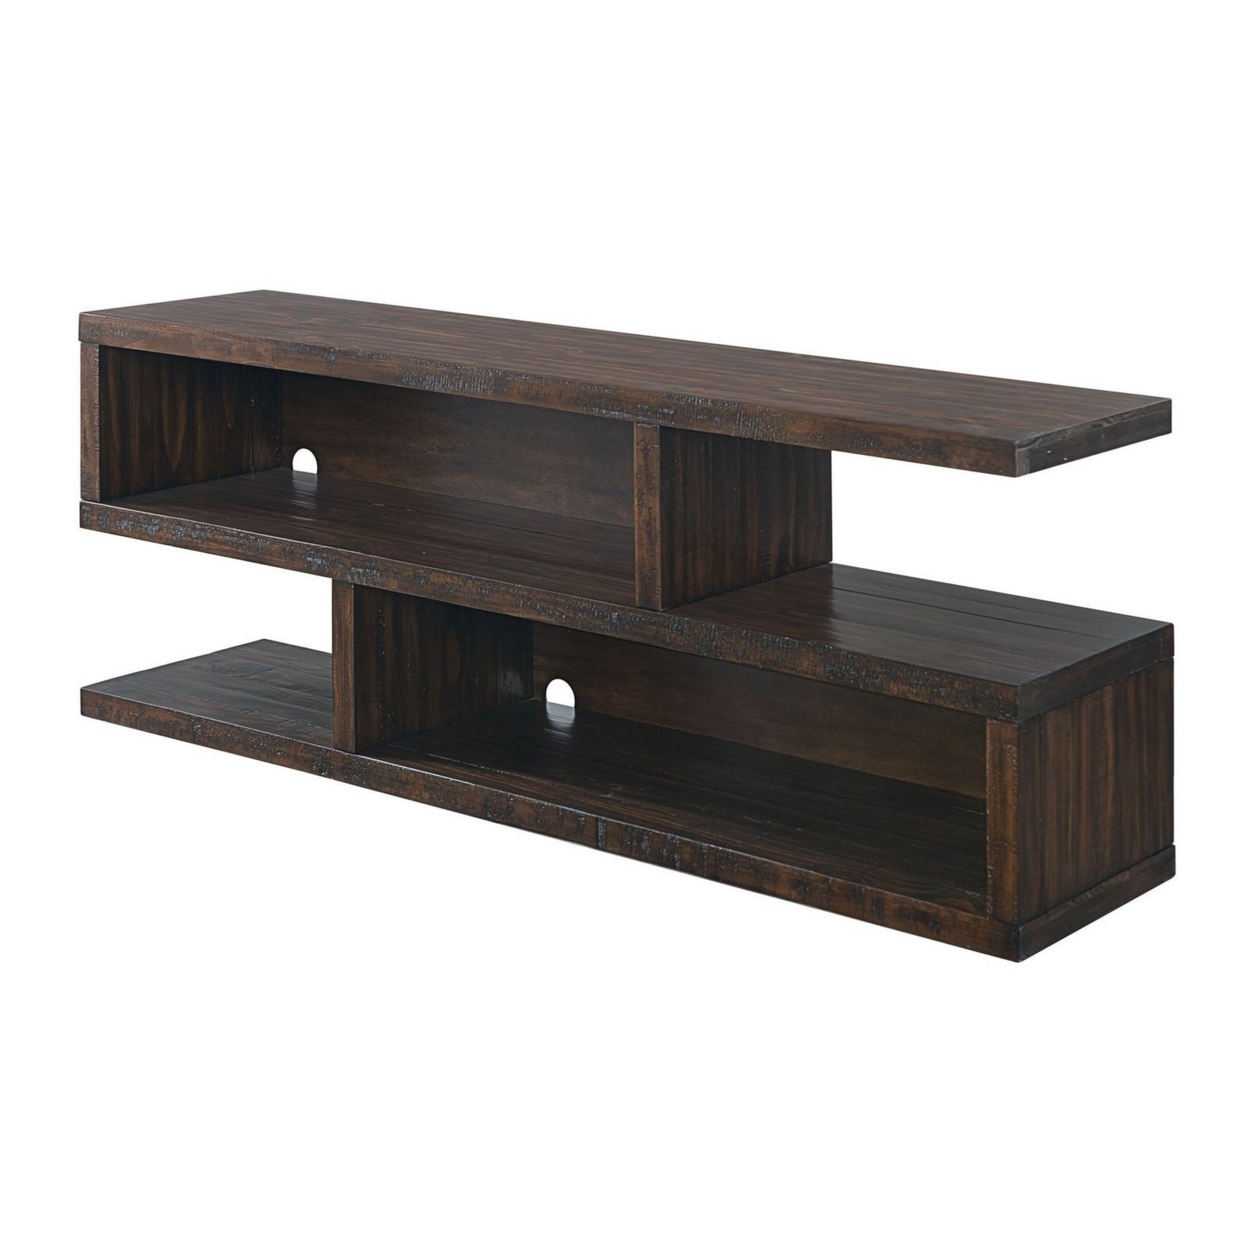 70 Inch Contemporary Wooden TV Stand With Flat Base, Brown- Saltoro Sherpi